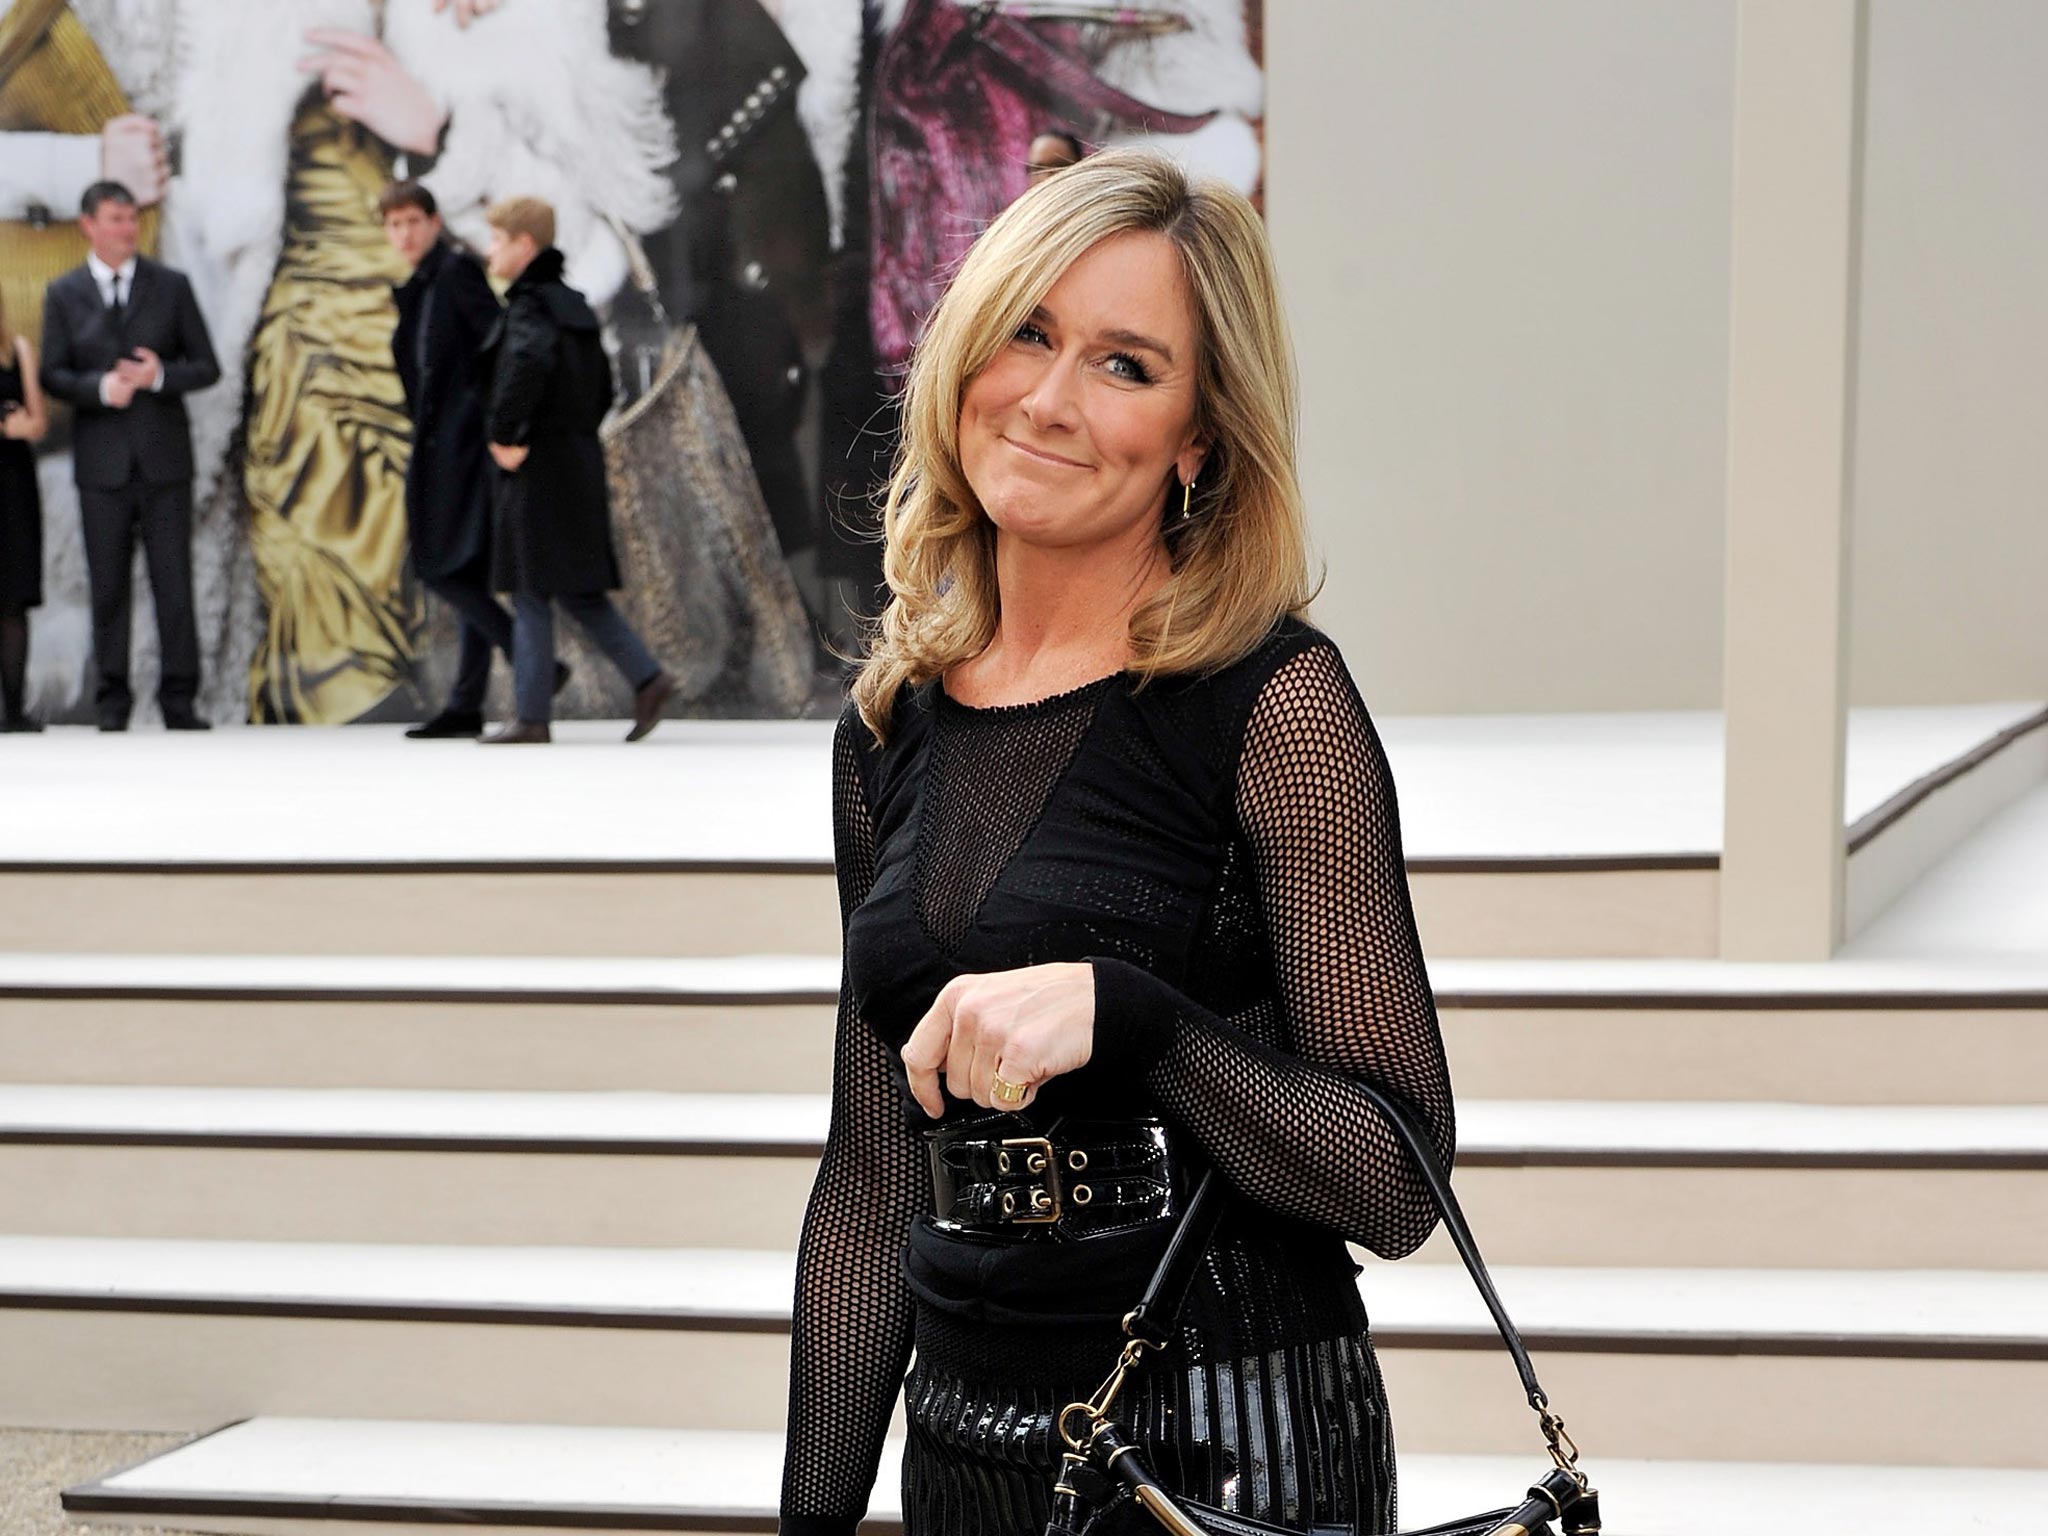 Angela Ahrendts, an American citizen, is joining Apple